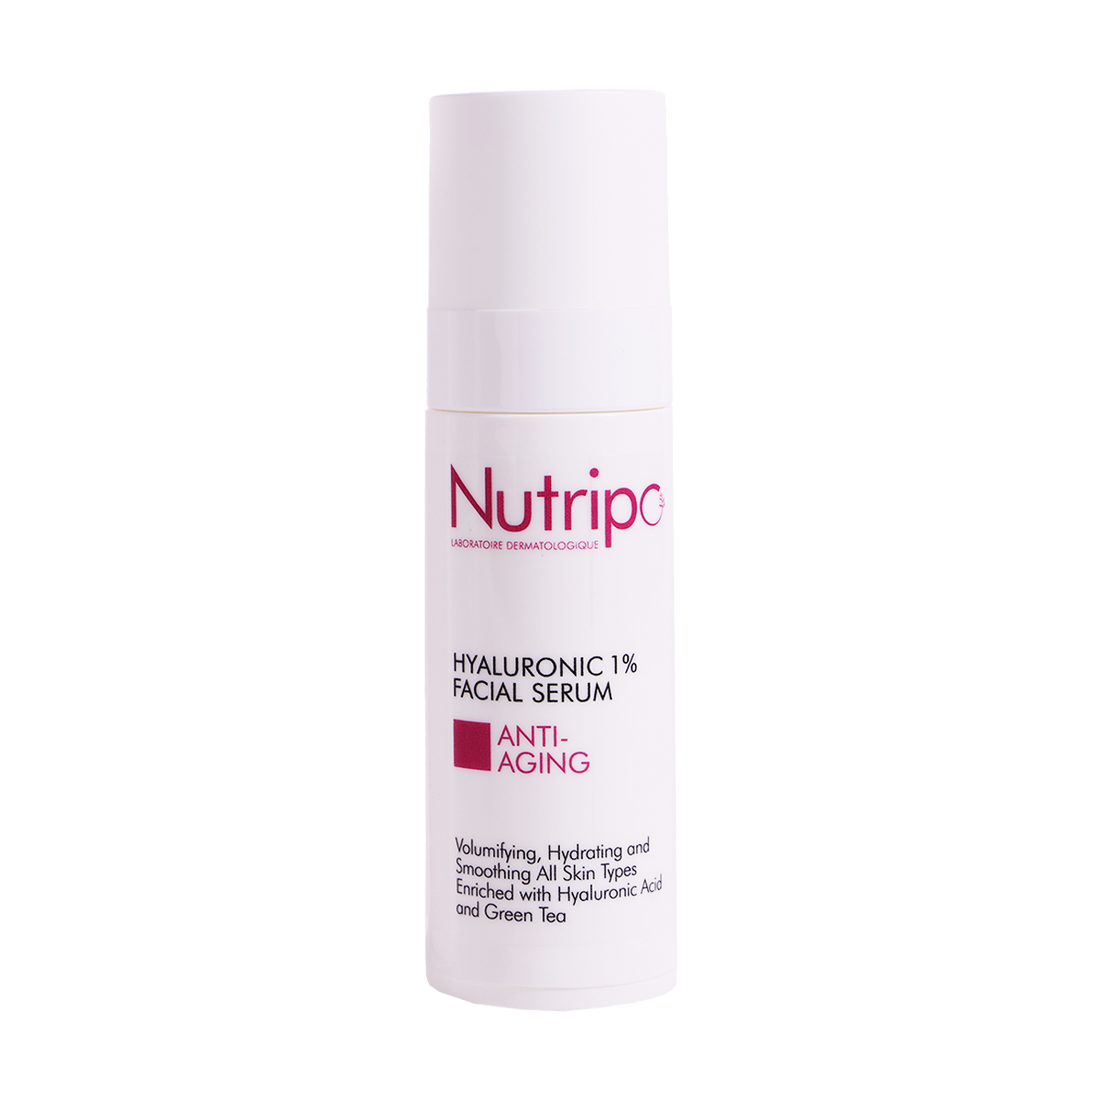 Hyaluronic 1% Facial Serum 30 mL from Nutripo